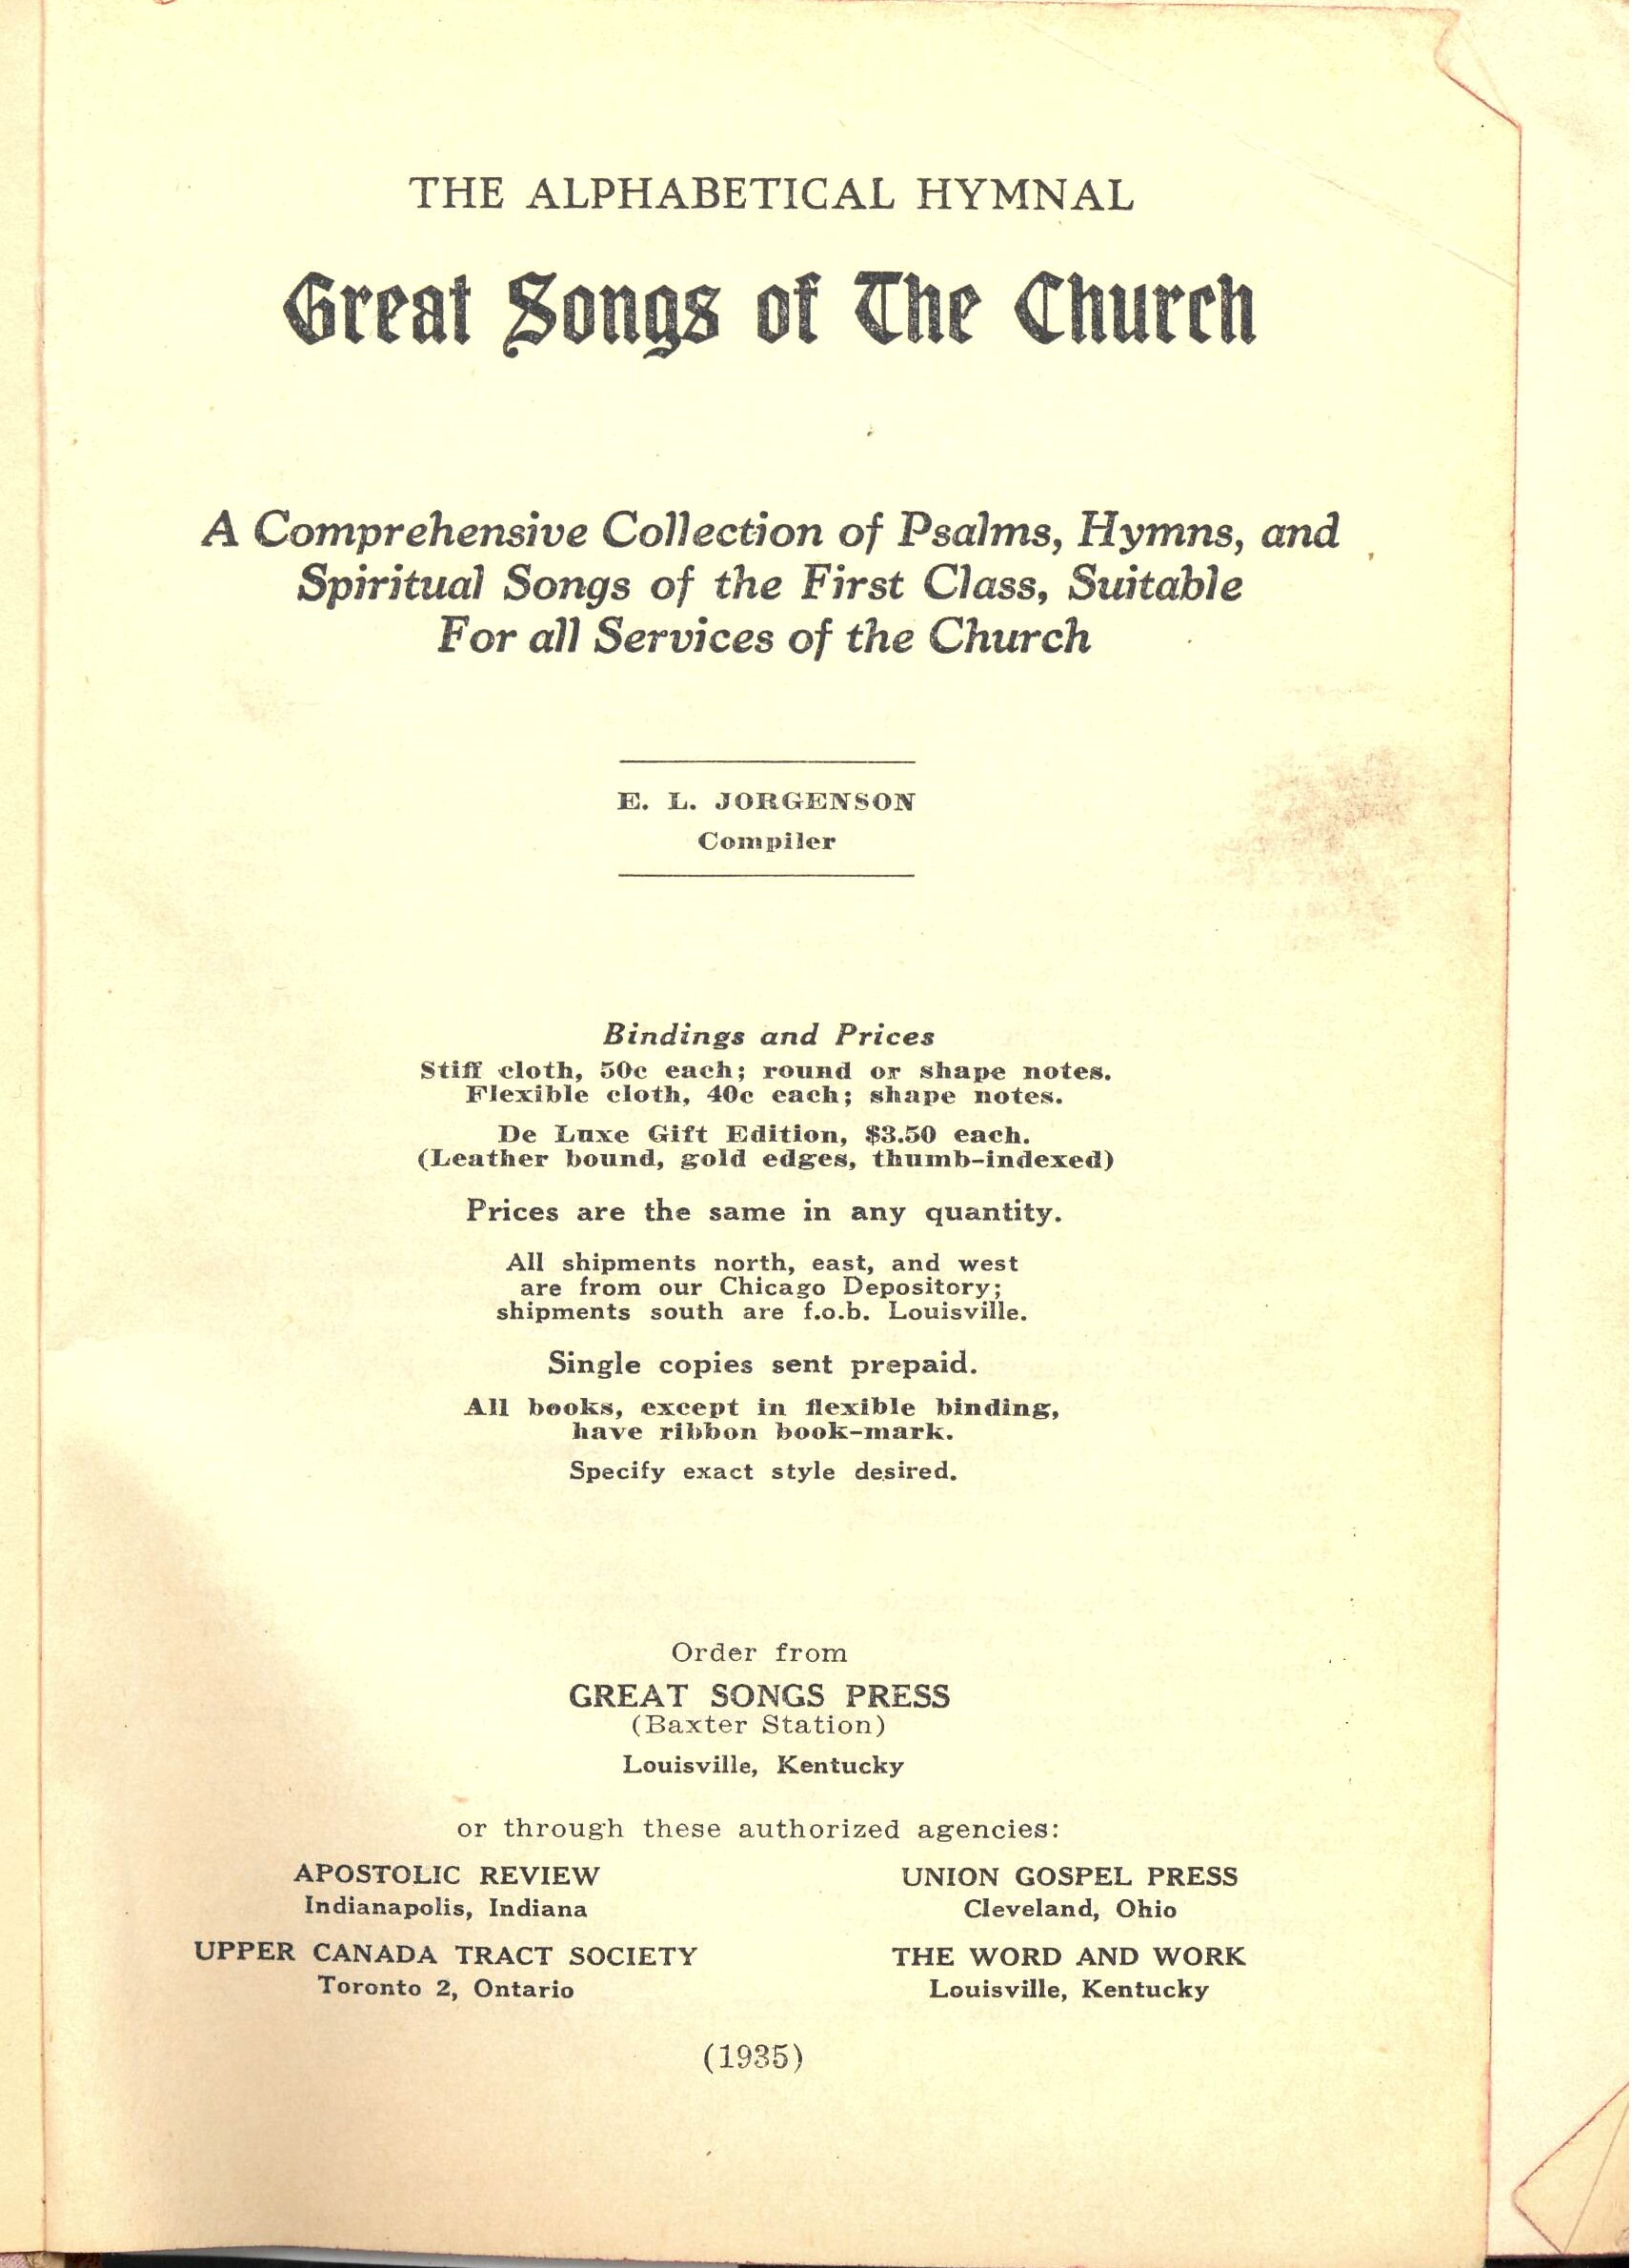 Great Songs of the Church. A Comprehensive Collection of Psalms, Hymns, and Spiritual Songs of First Rank, Suitable for all Services of the Church. Alphabetically Arranged. E. L. Jorgenson, Compiler. Word and Work: Louisville, 1935 printing, red cover with round notes. Title page.